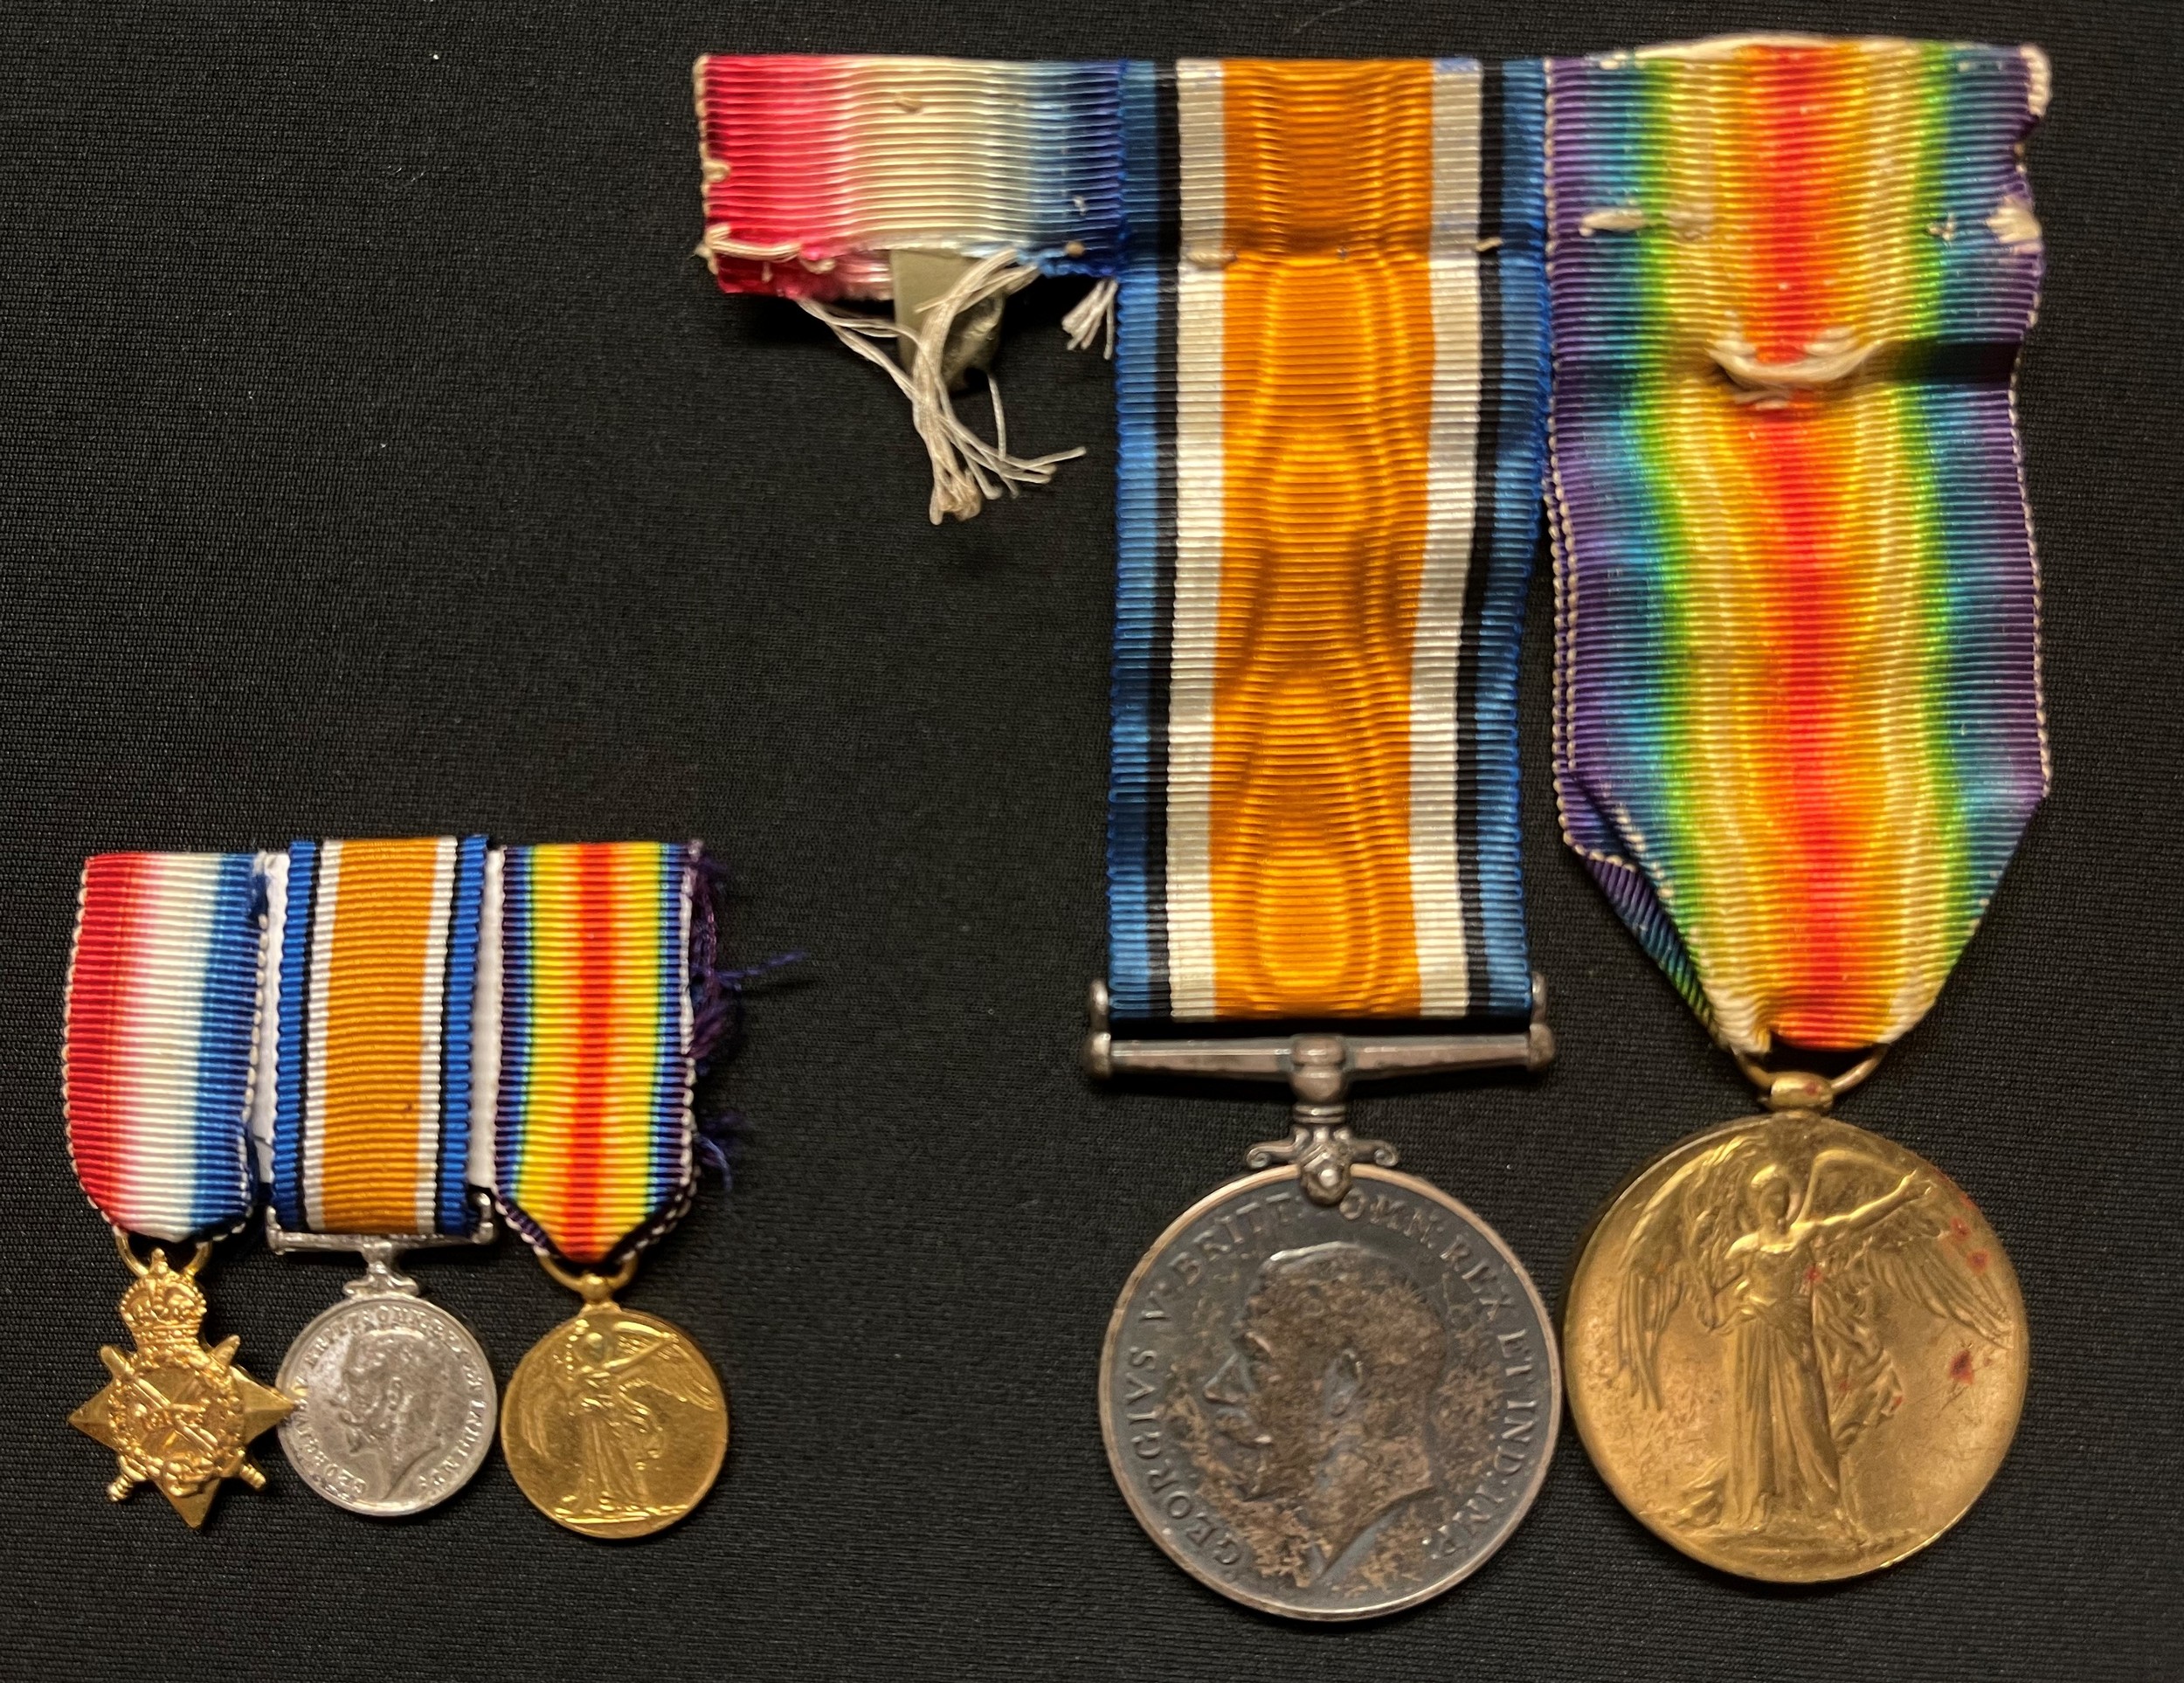 WW1 British War Medal and Victory Medal to 15949 Pte Frank Tysoe, Northamptonshire Regiment. Mounted